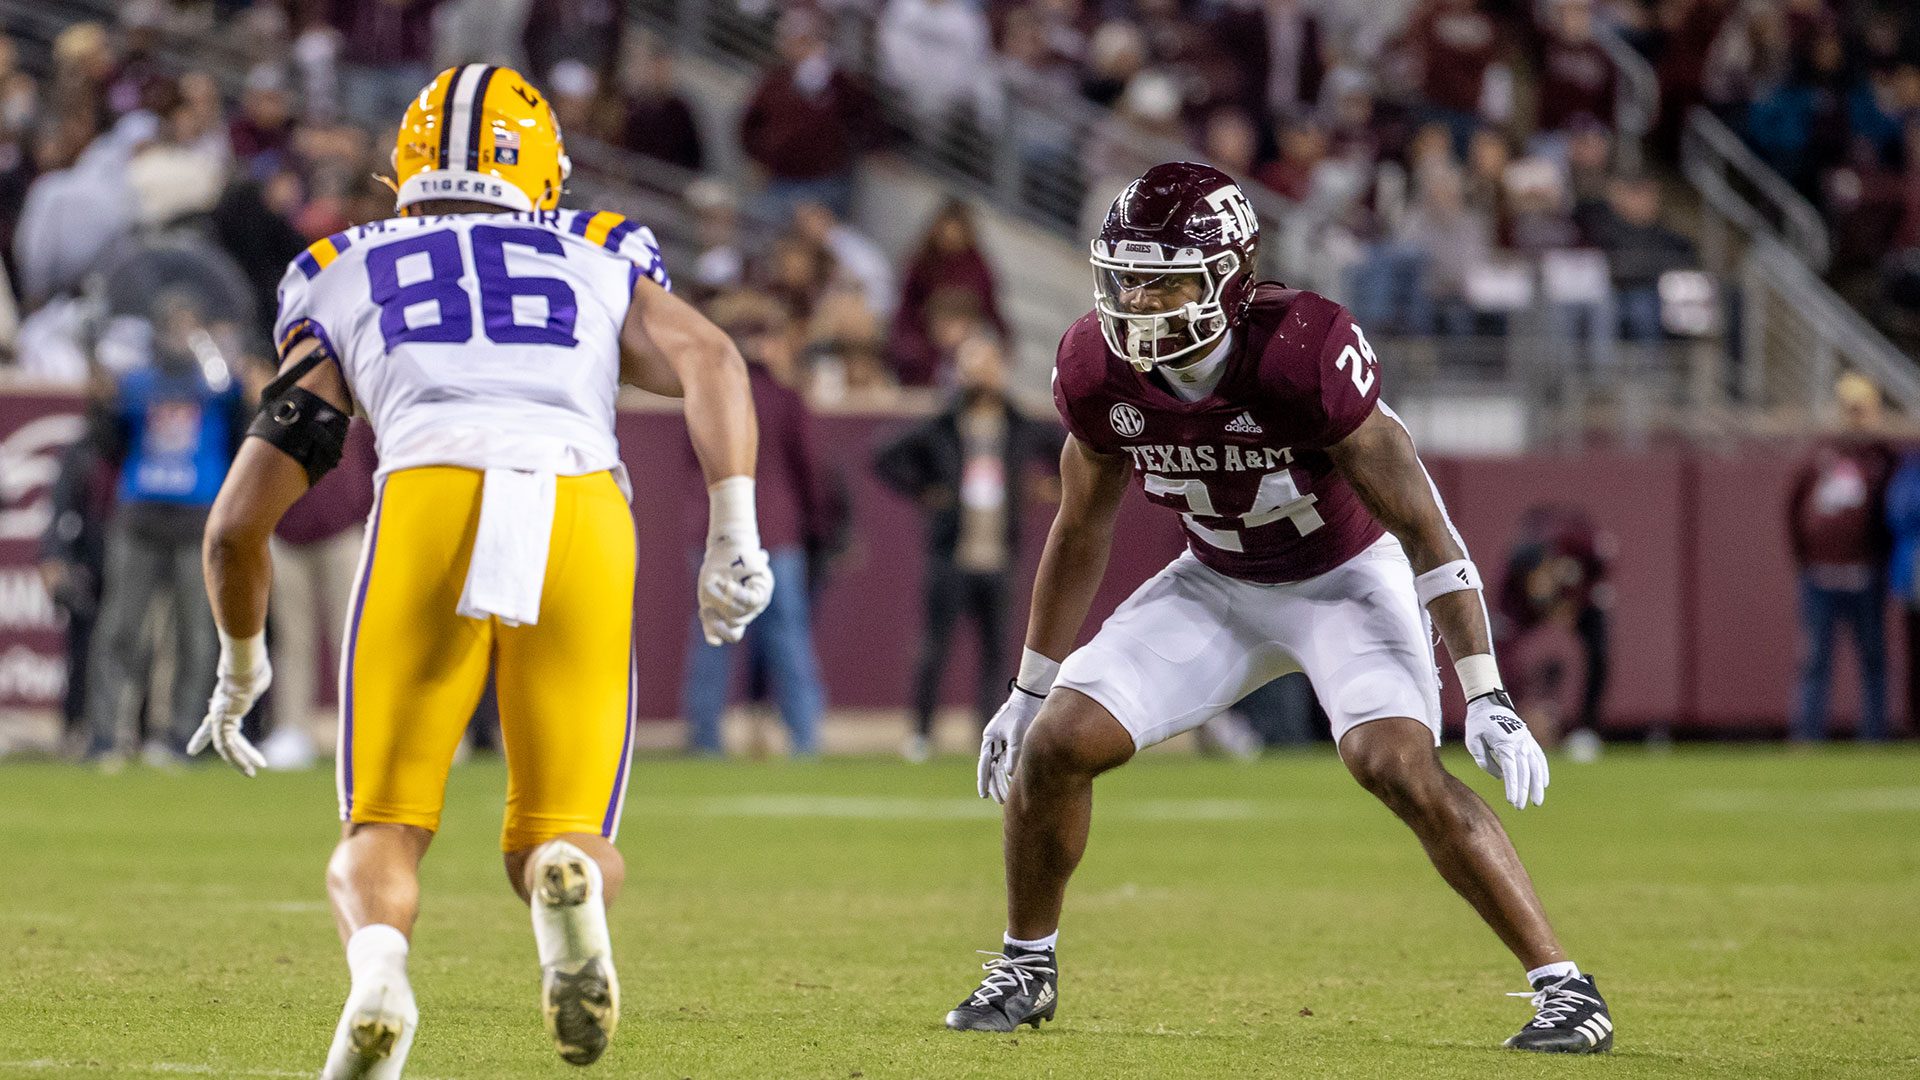 Chris Russell Jr is a linebacker who you need to keep an eye on this season at Texas A&M. He's an above-average tackler who possesses good potential. Hula Bowl scout Solomon Sterling breaks down Russell as an NFL Prospect in his report